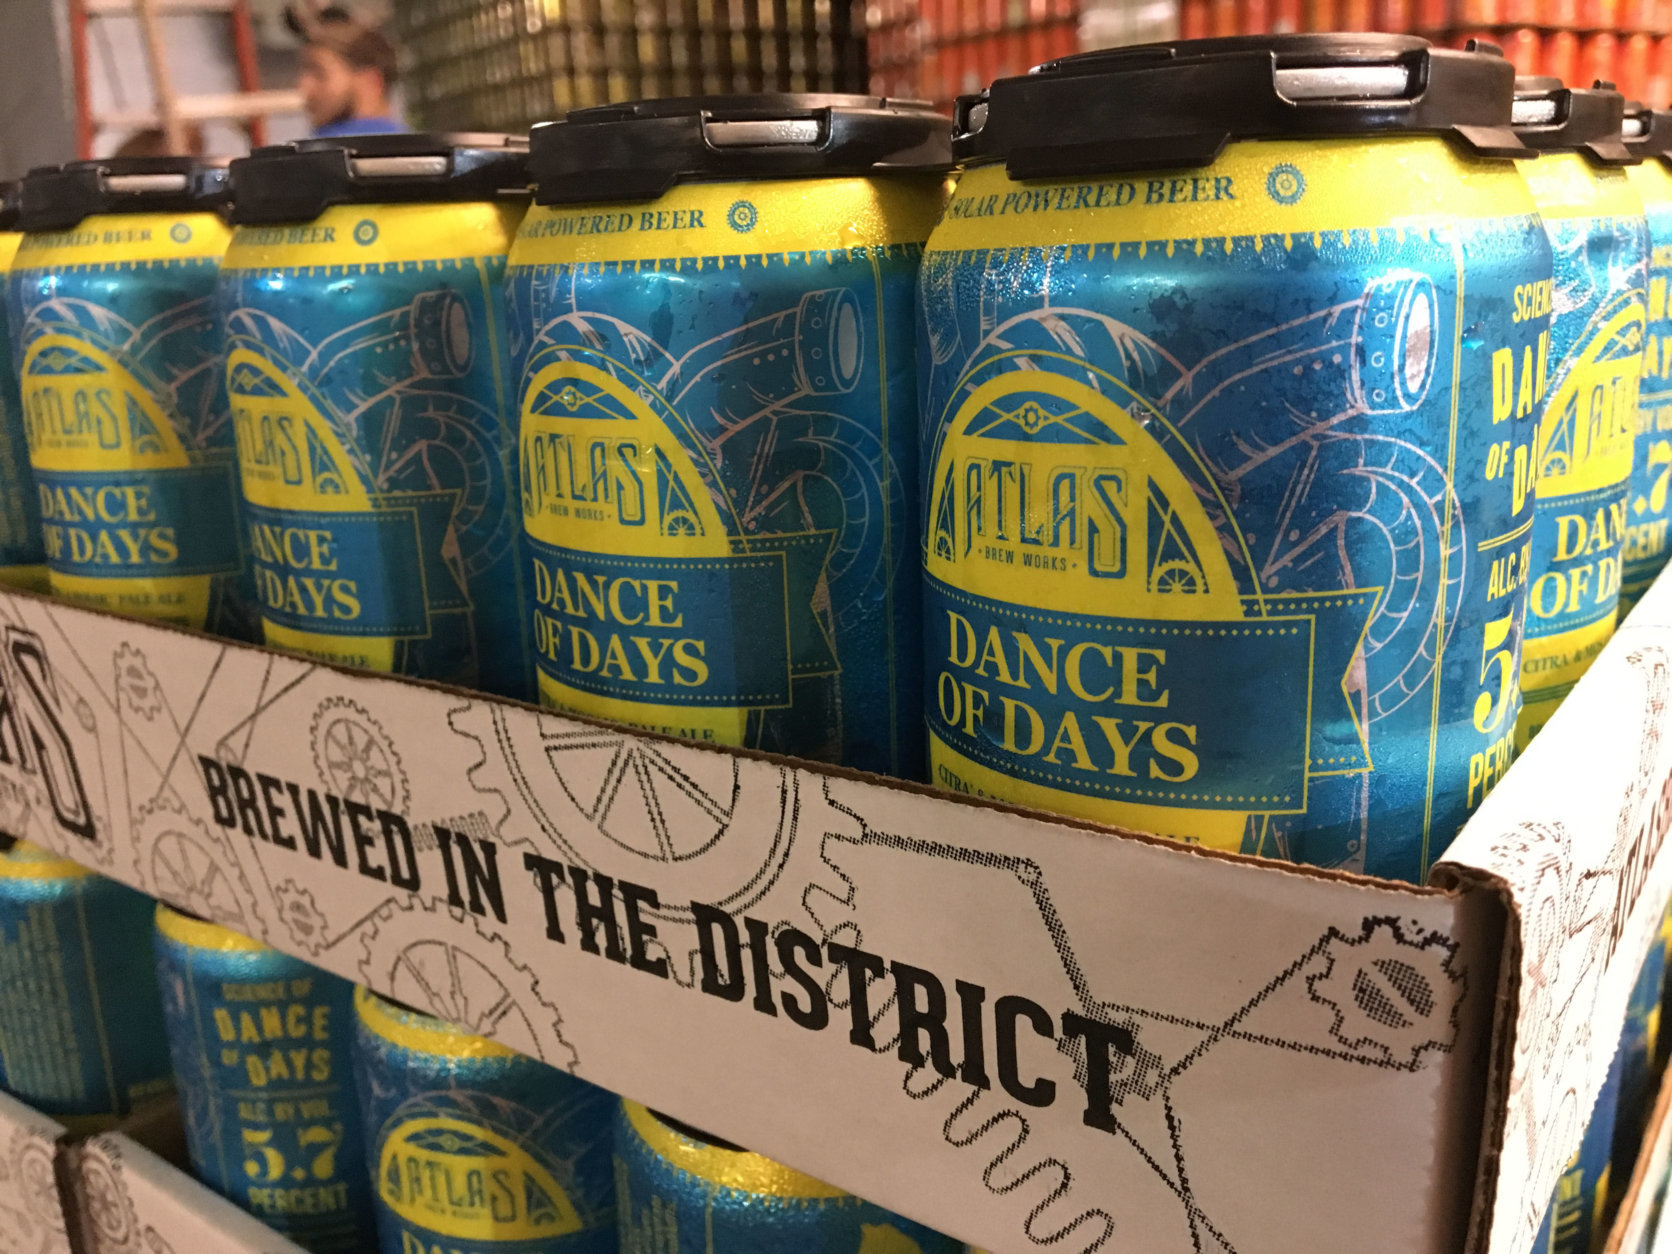 Atlas Brew Works' beers include its West Coast-style IPA Ponzi, craft lager District Common, dry-hopped pale ale Dance of Days, and its 1500 South Cap Lager, which it brews for the Washington Nationals. (Courtesy Atlas Brew Works)